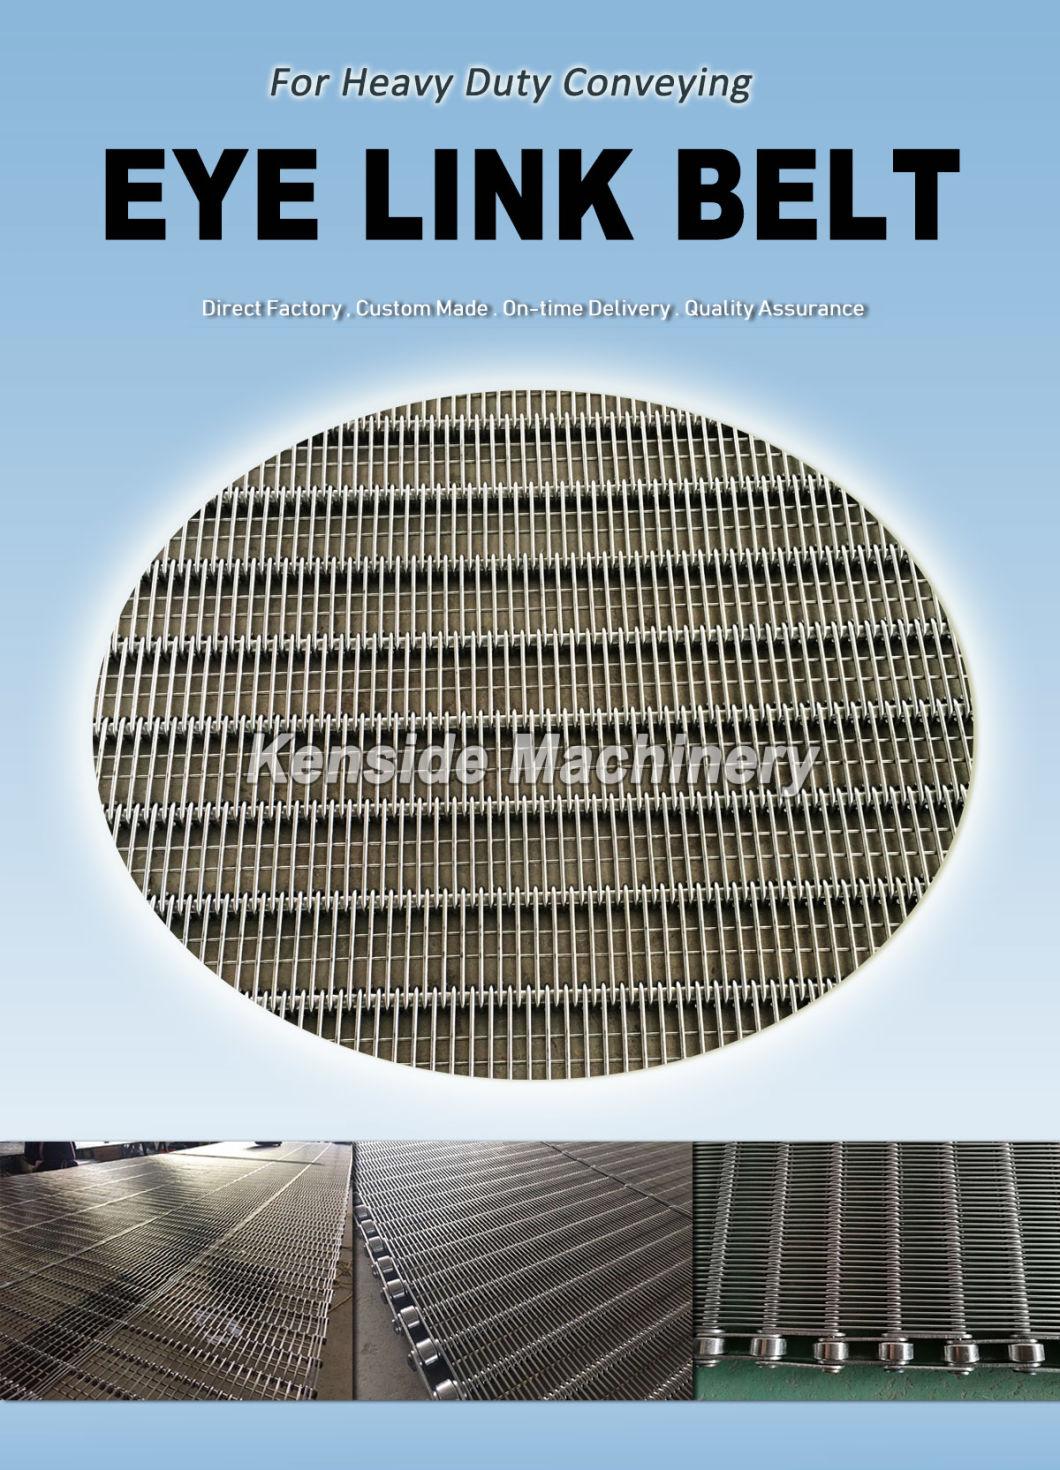 Eye Link Belt for Bread, Pastry and Potato Processing Industries